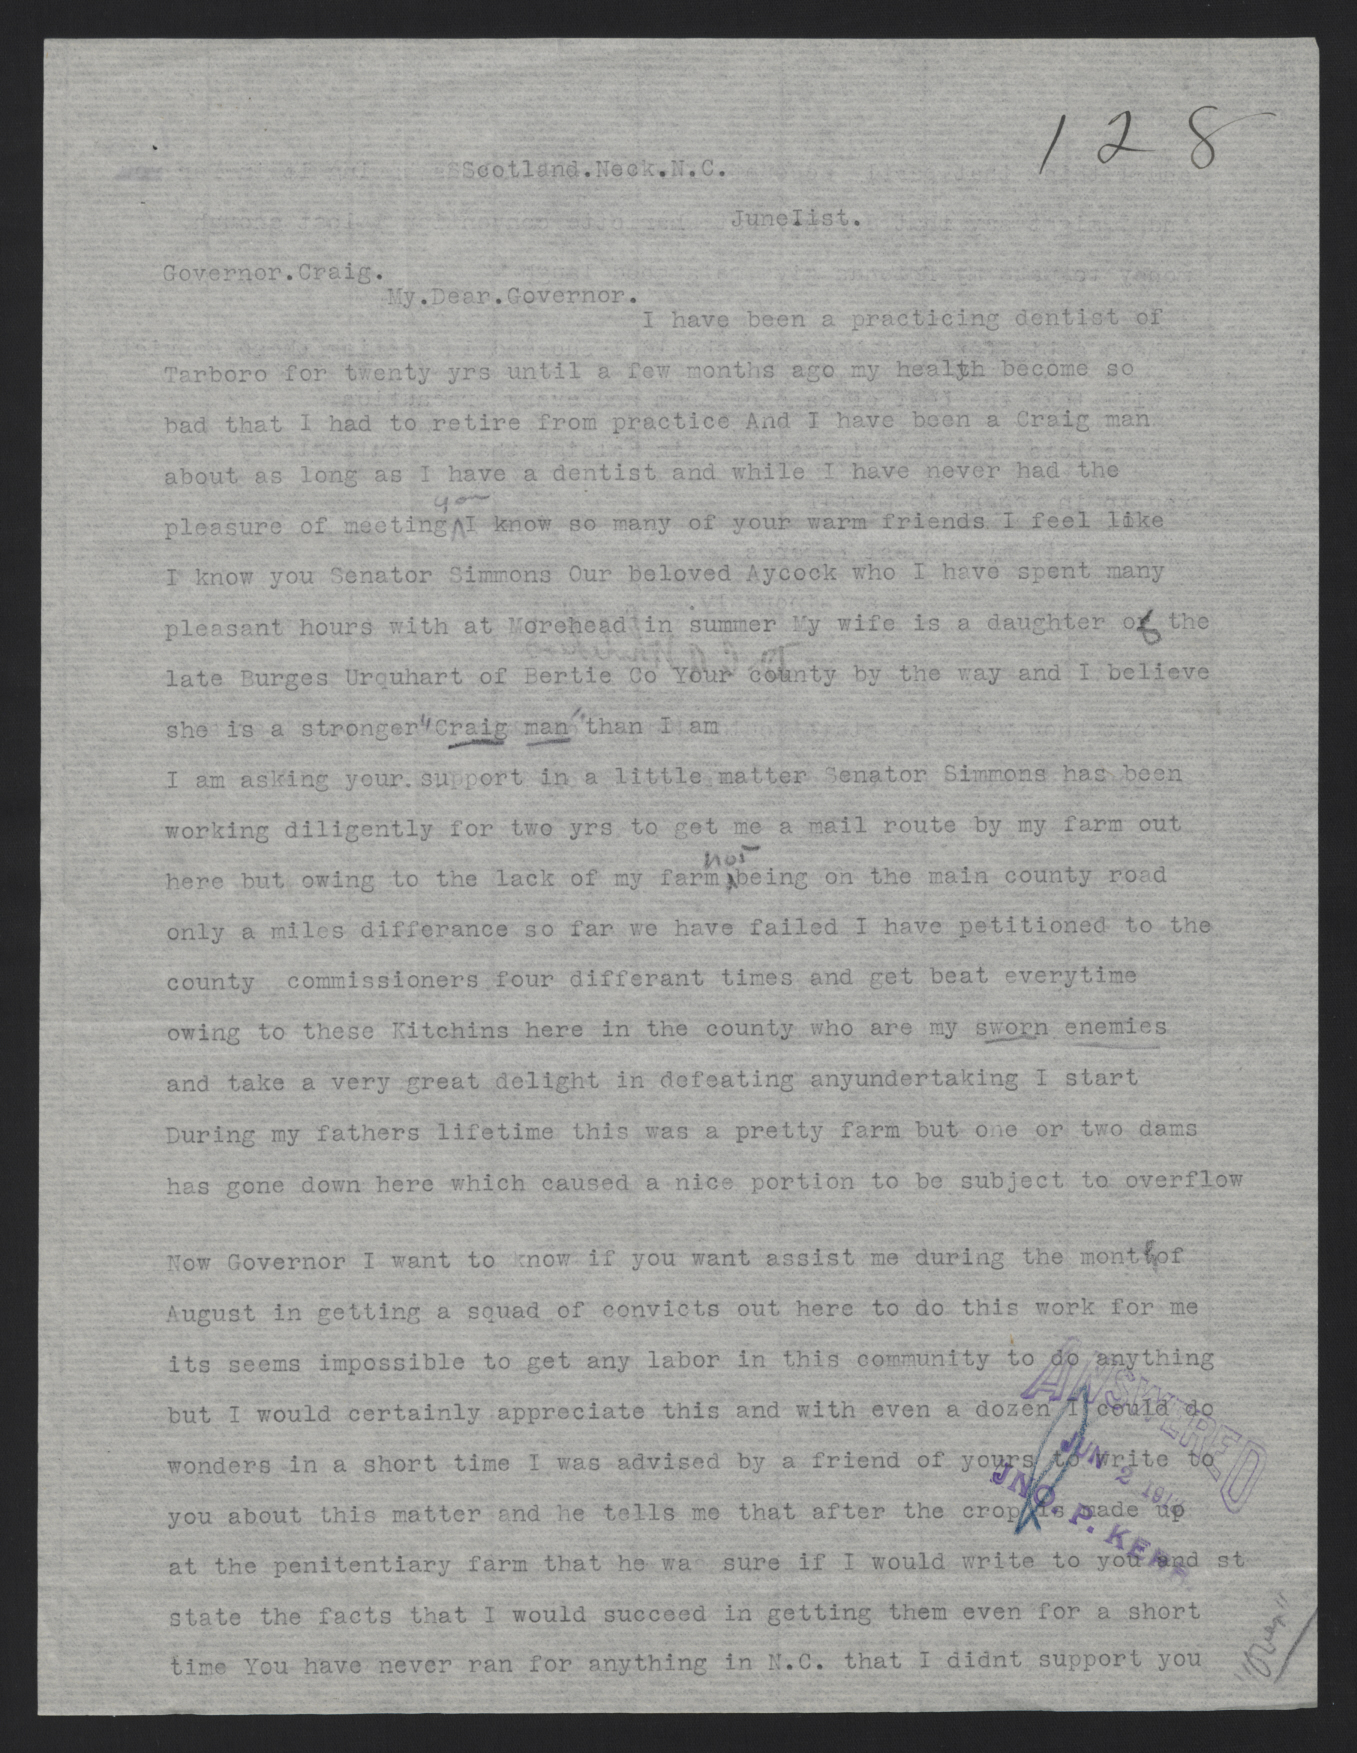 Letter from Whitehead to Craig, June 1, 1913, page 1